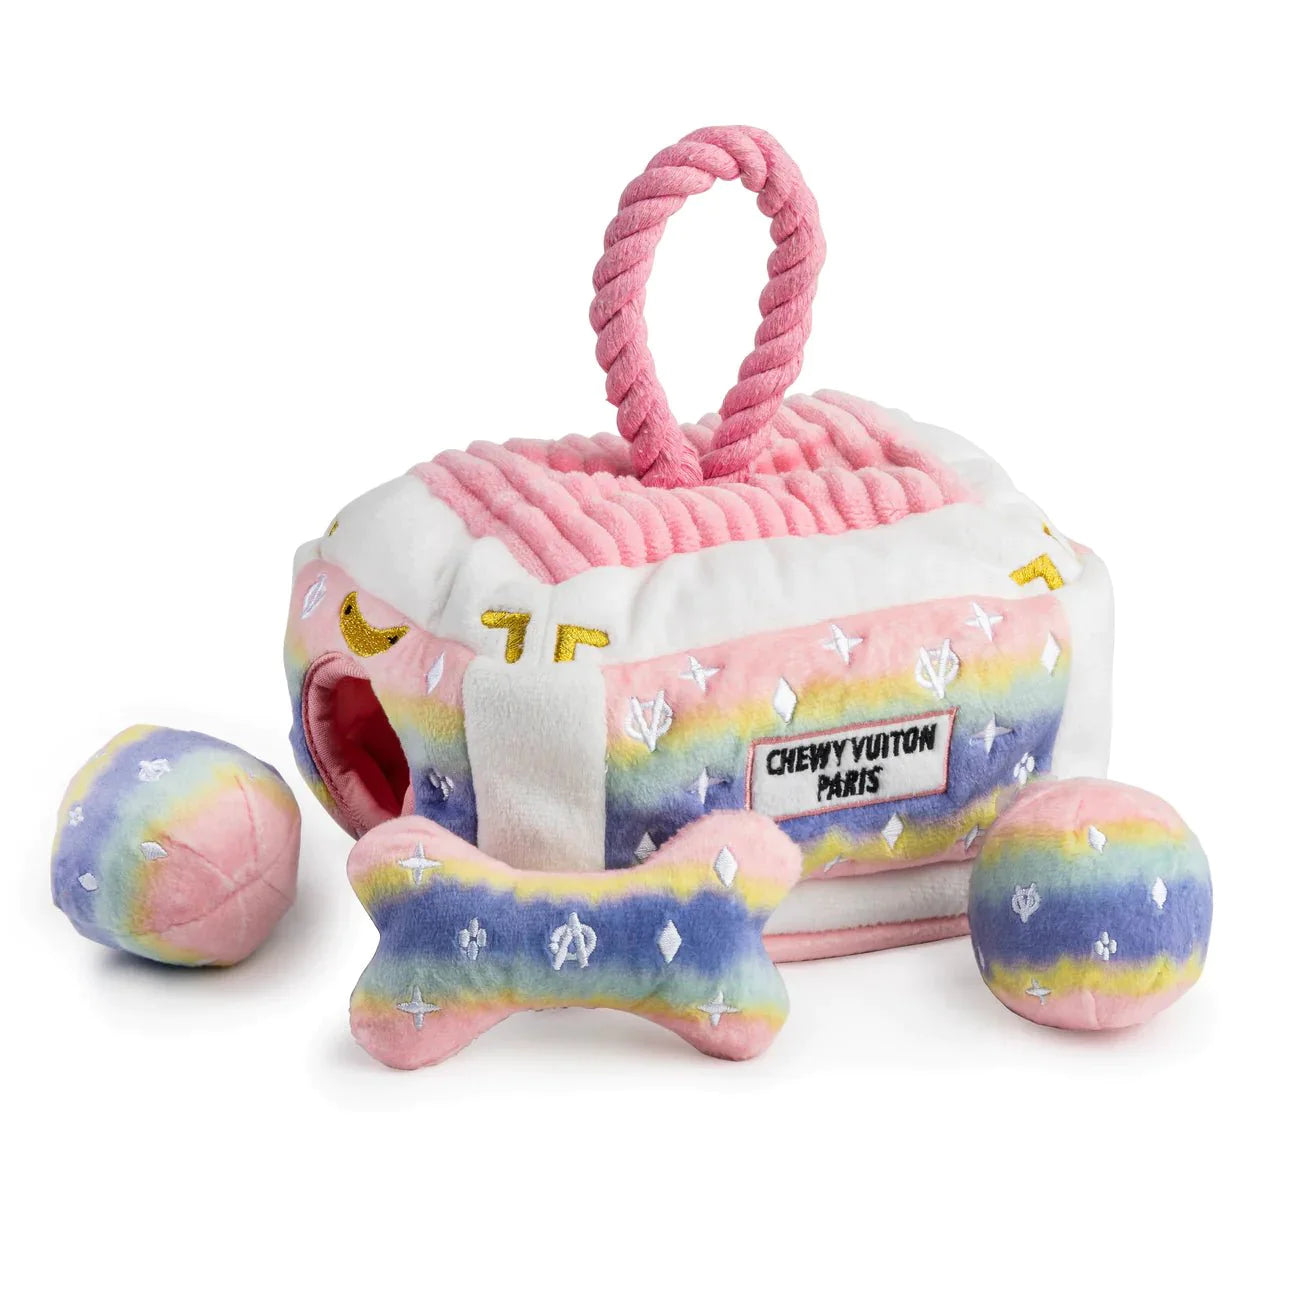 Chewy Vuiton Pink Ombre Interactive Trunk